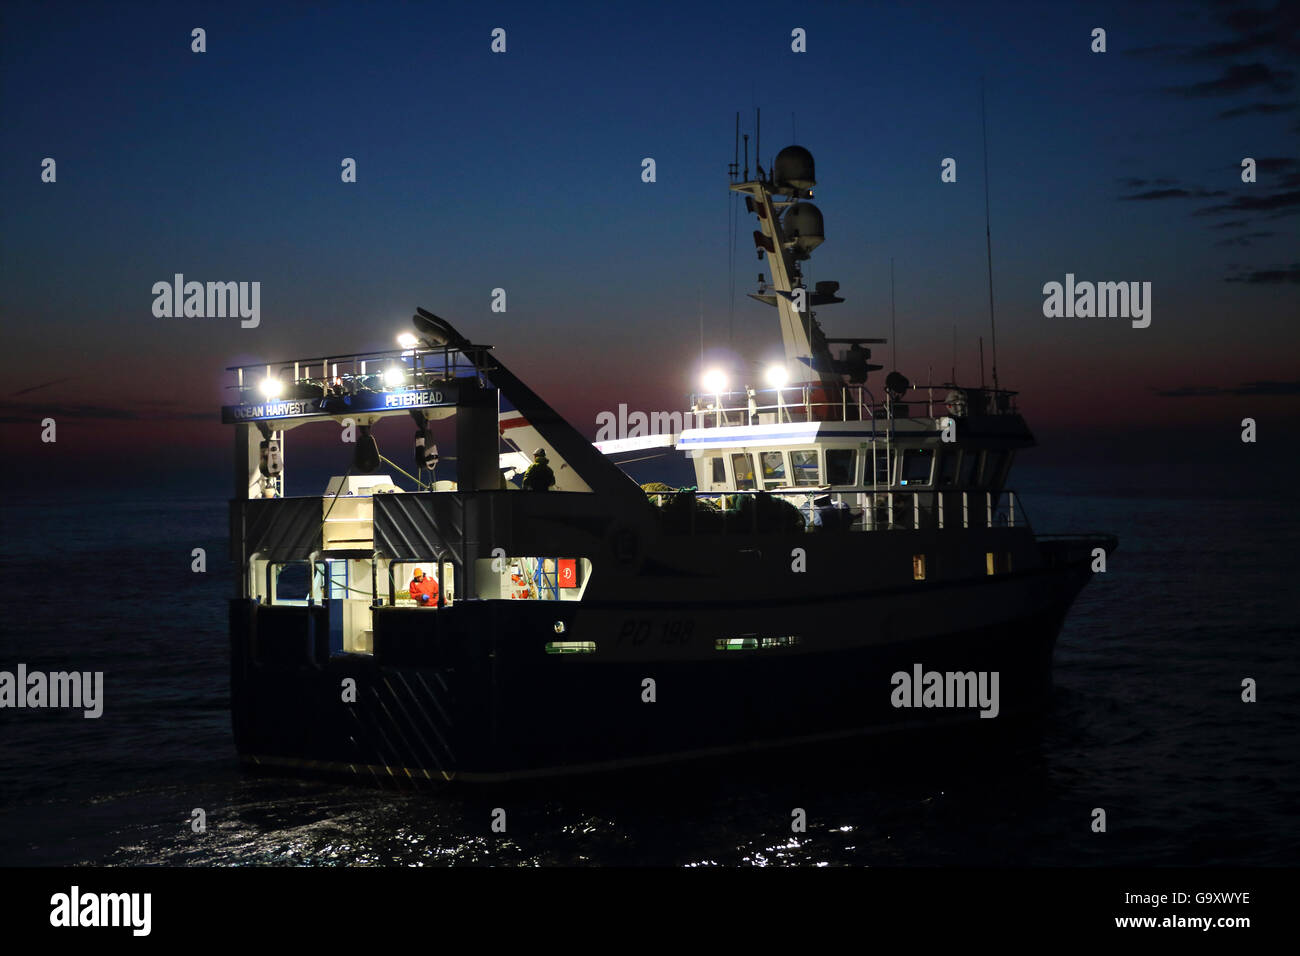 Fishing vessel &#39;Ocean Harvest&#39; trawling at dusk, North Sea, May 2014. Property released. All non-editorial uses must be cleared individually. Stock Photo